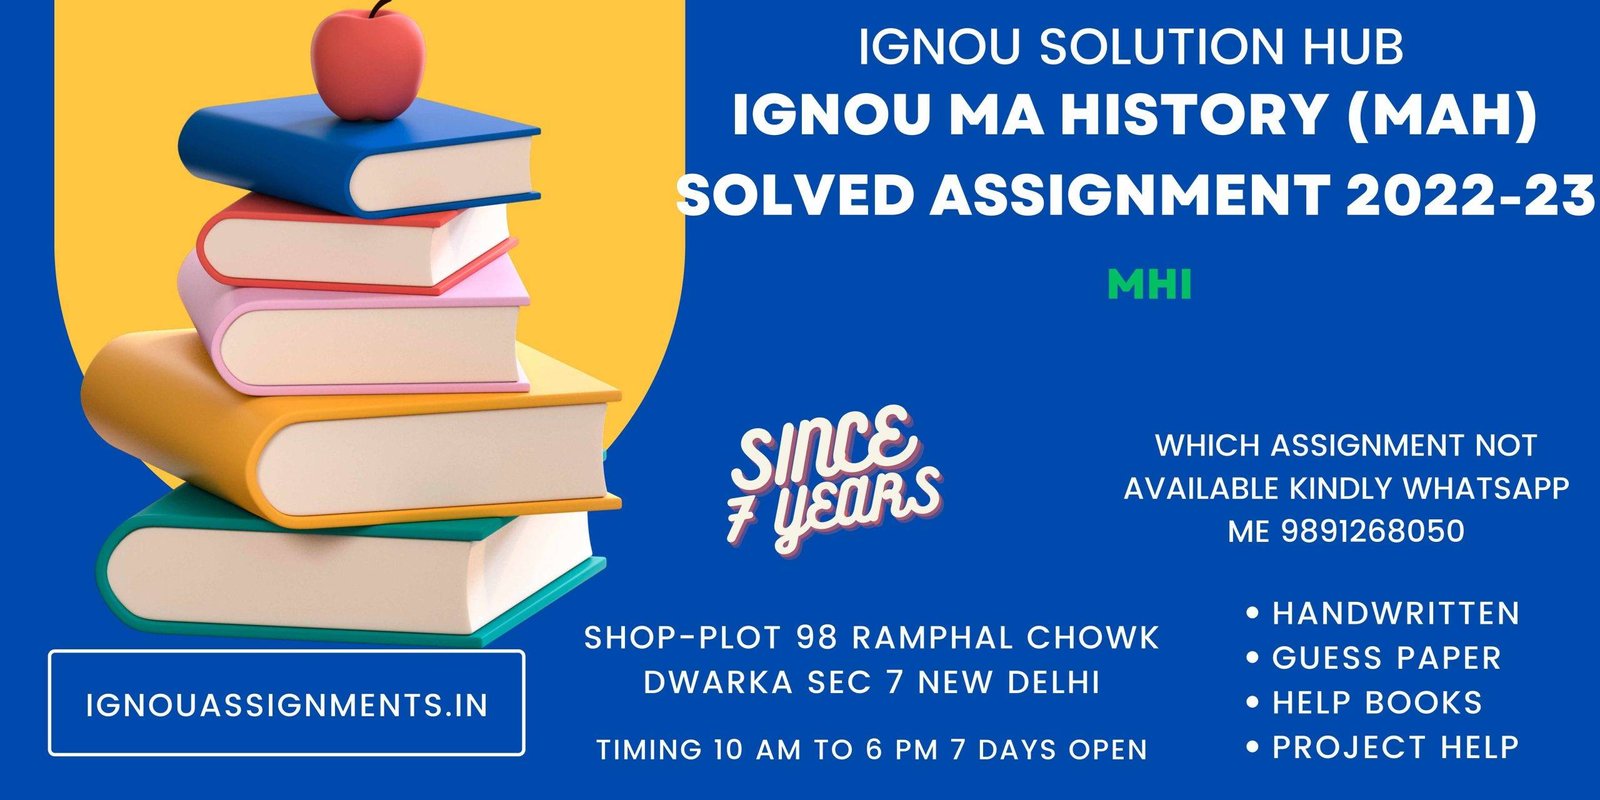 ignou ma history assignment 2022 23 in hindi